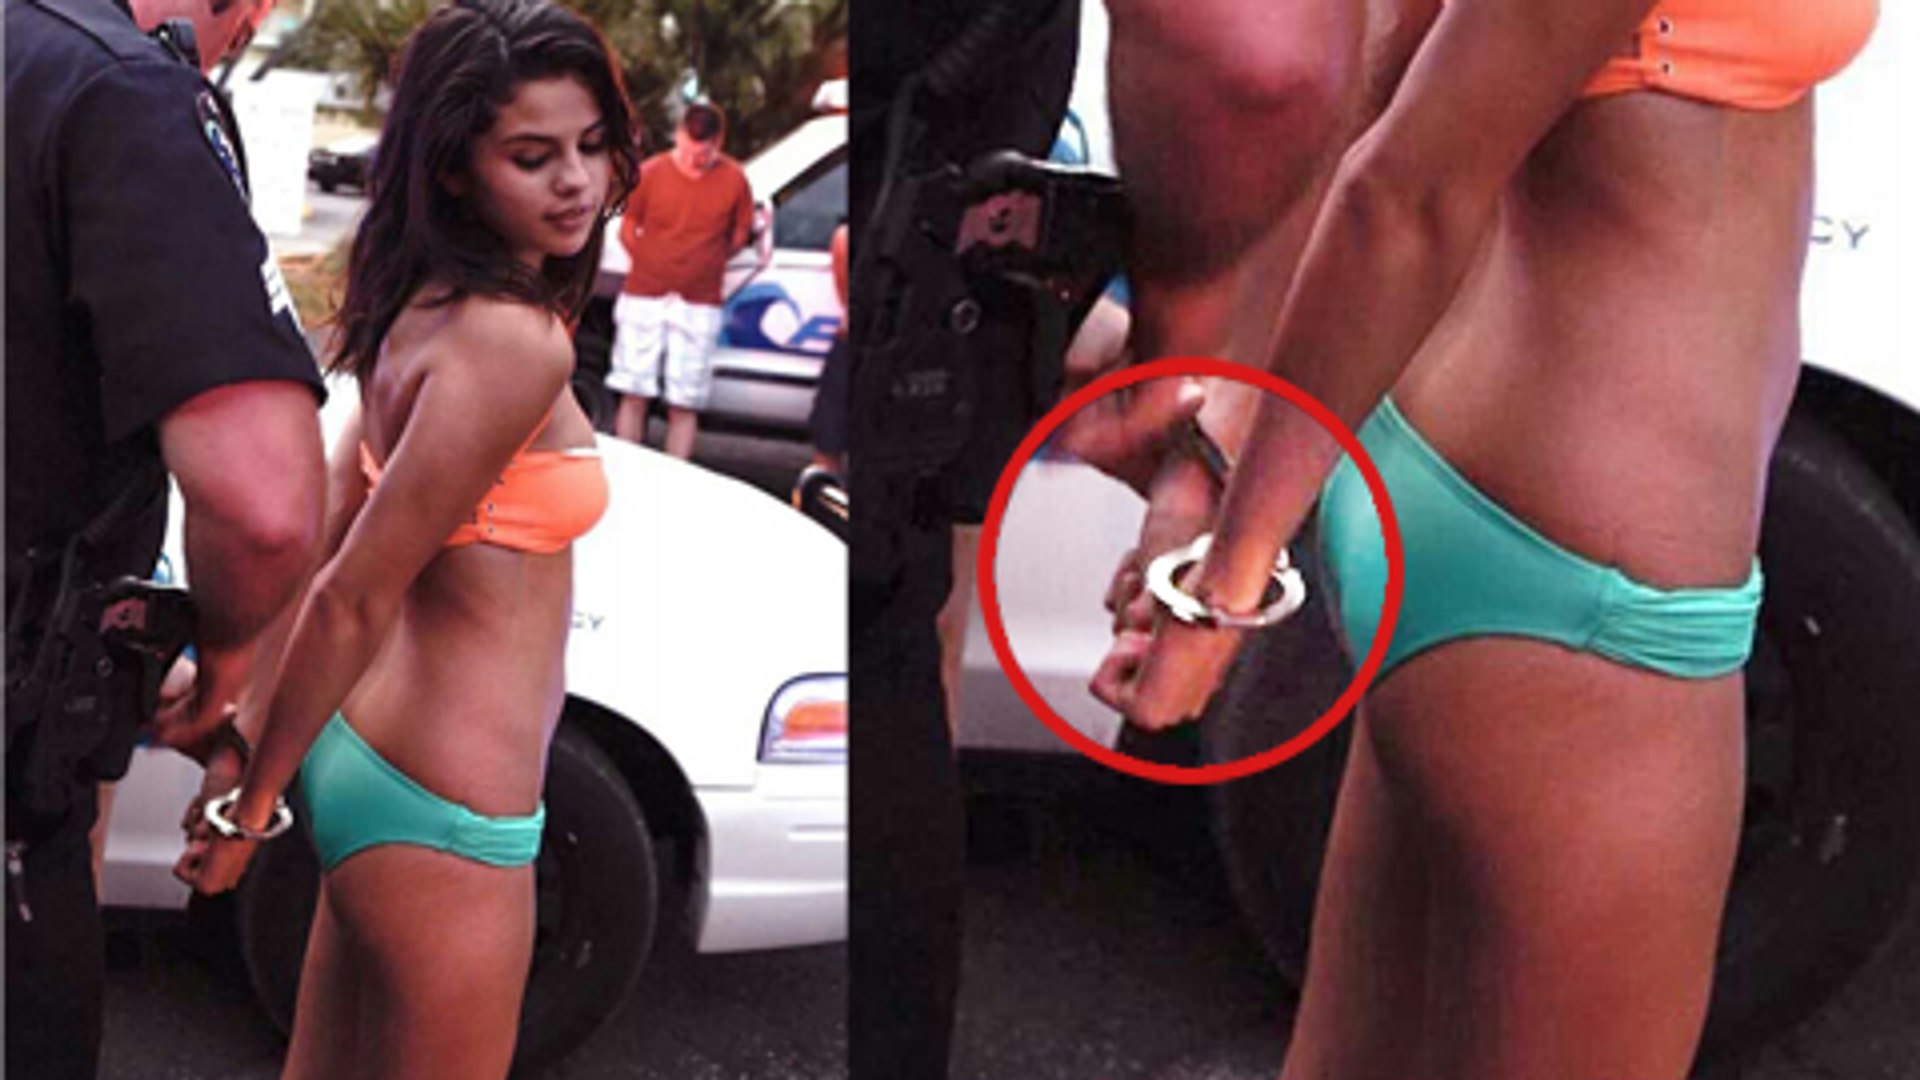 candace fournier recommends selena gomez stripping naked pic